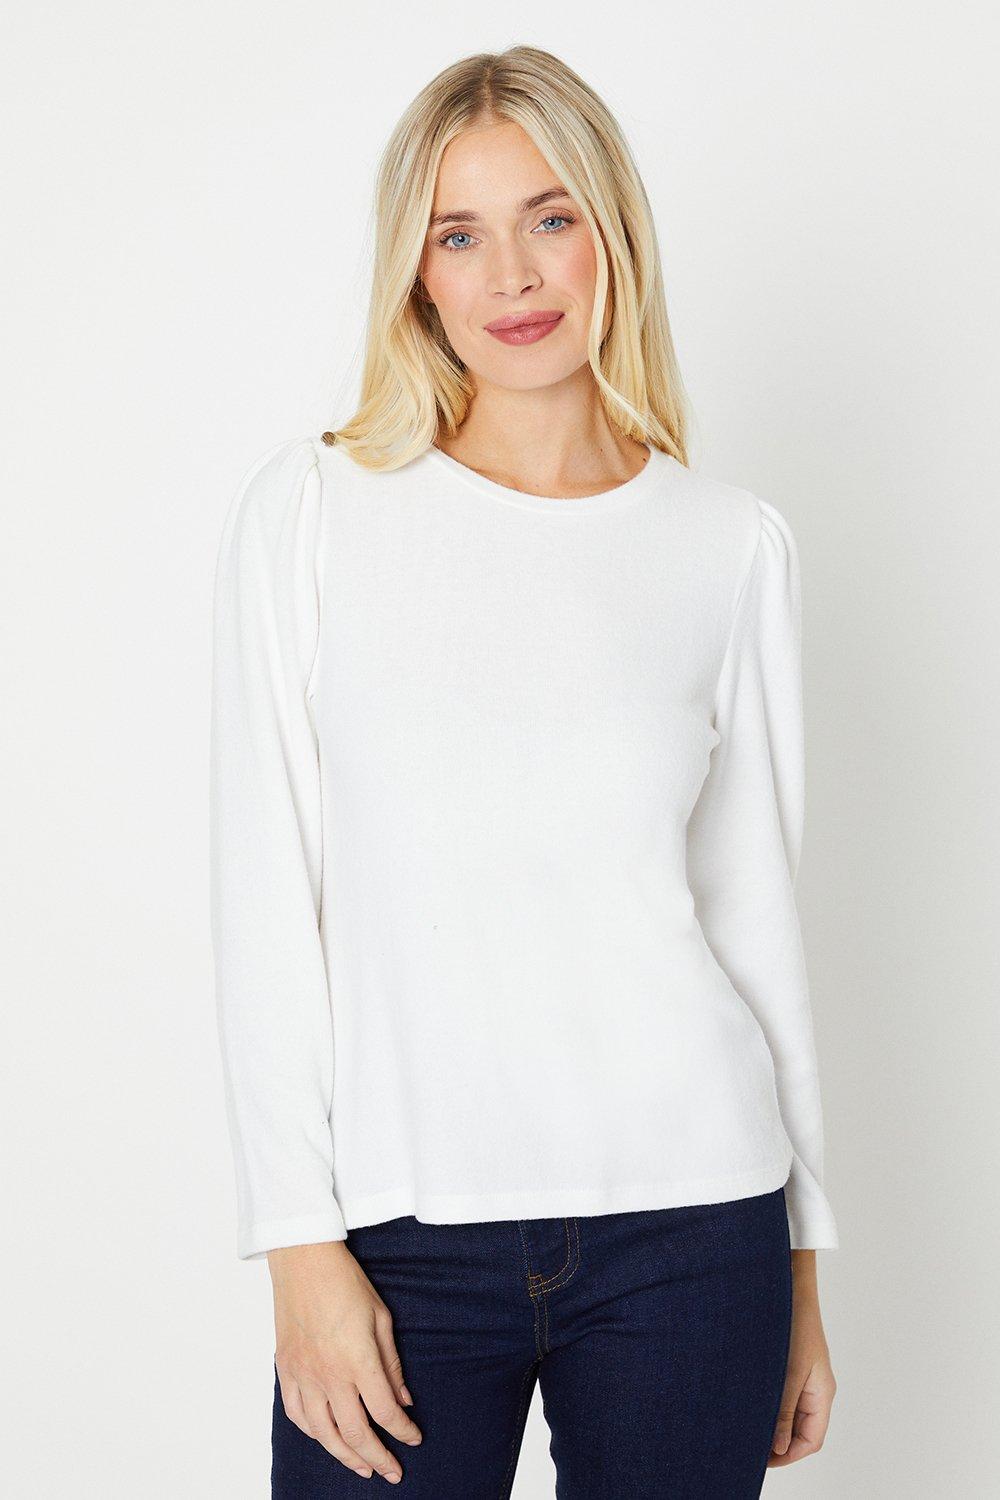 Women's Petite Diamonte Button Shoulder Brushed Long Sleeve Top - ivory - M